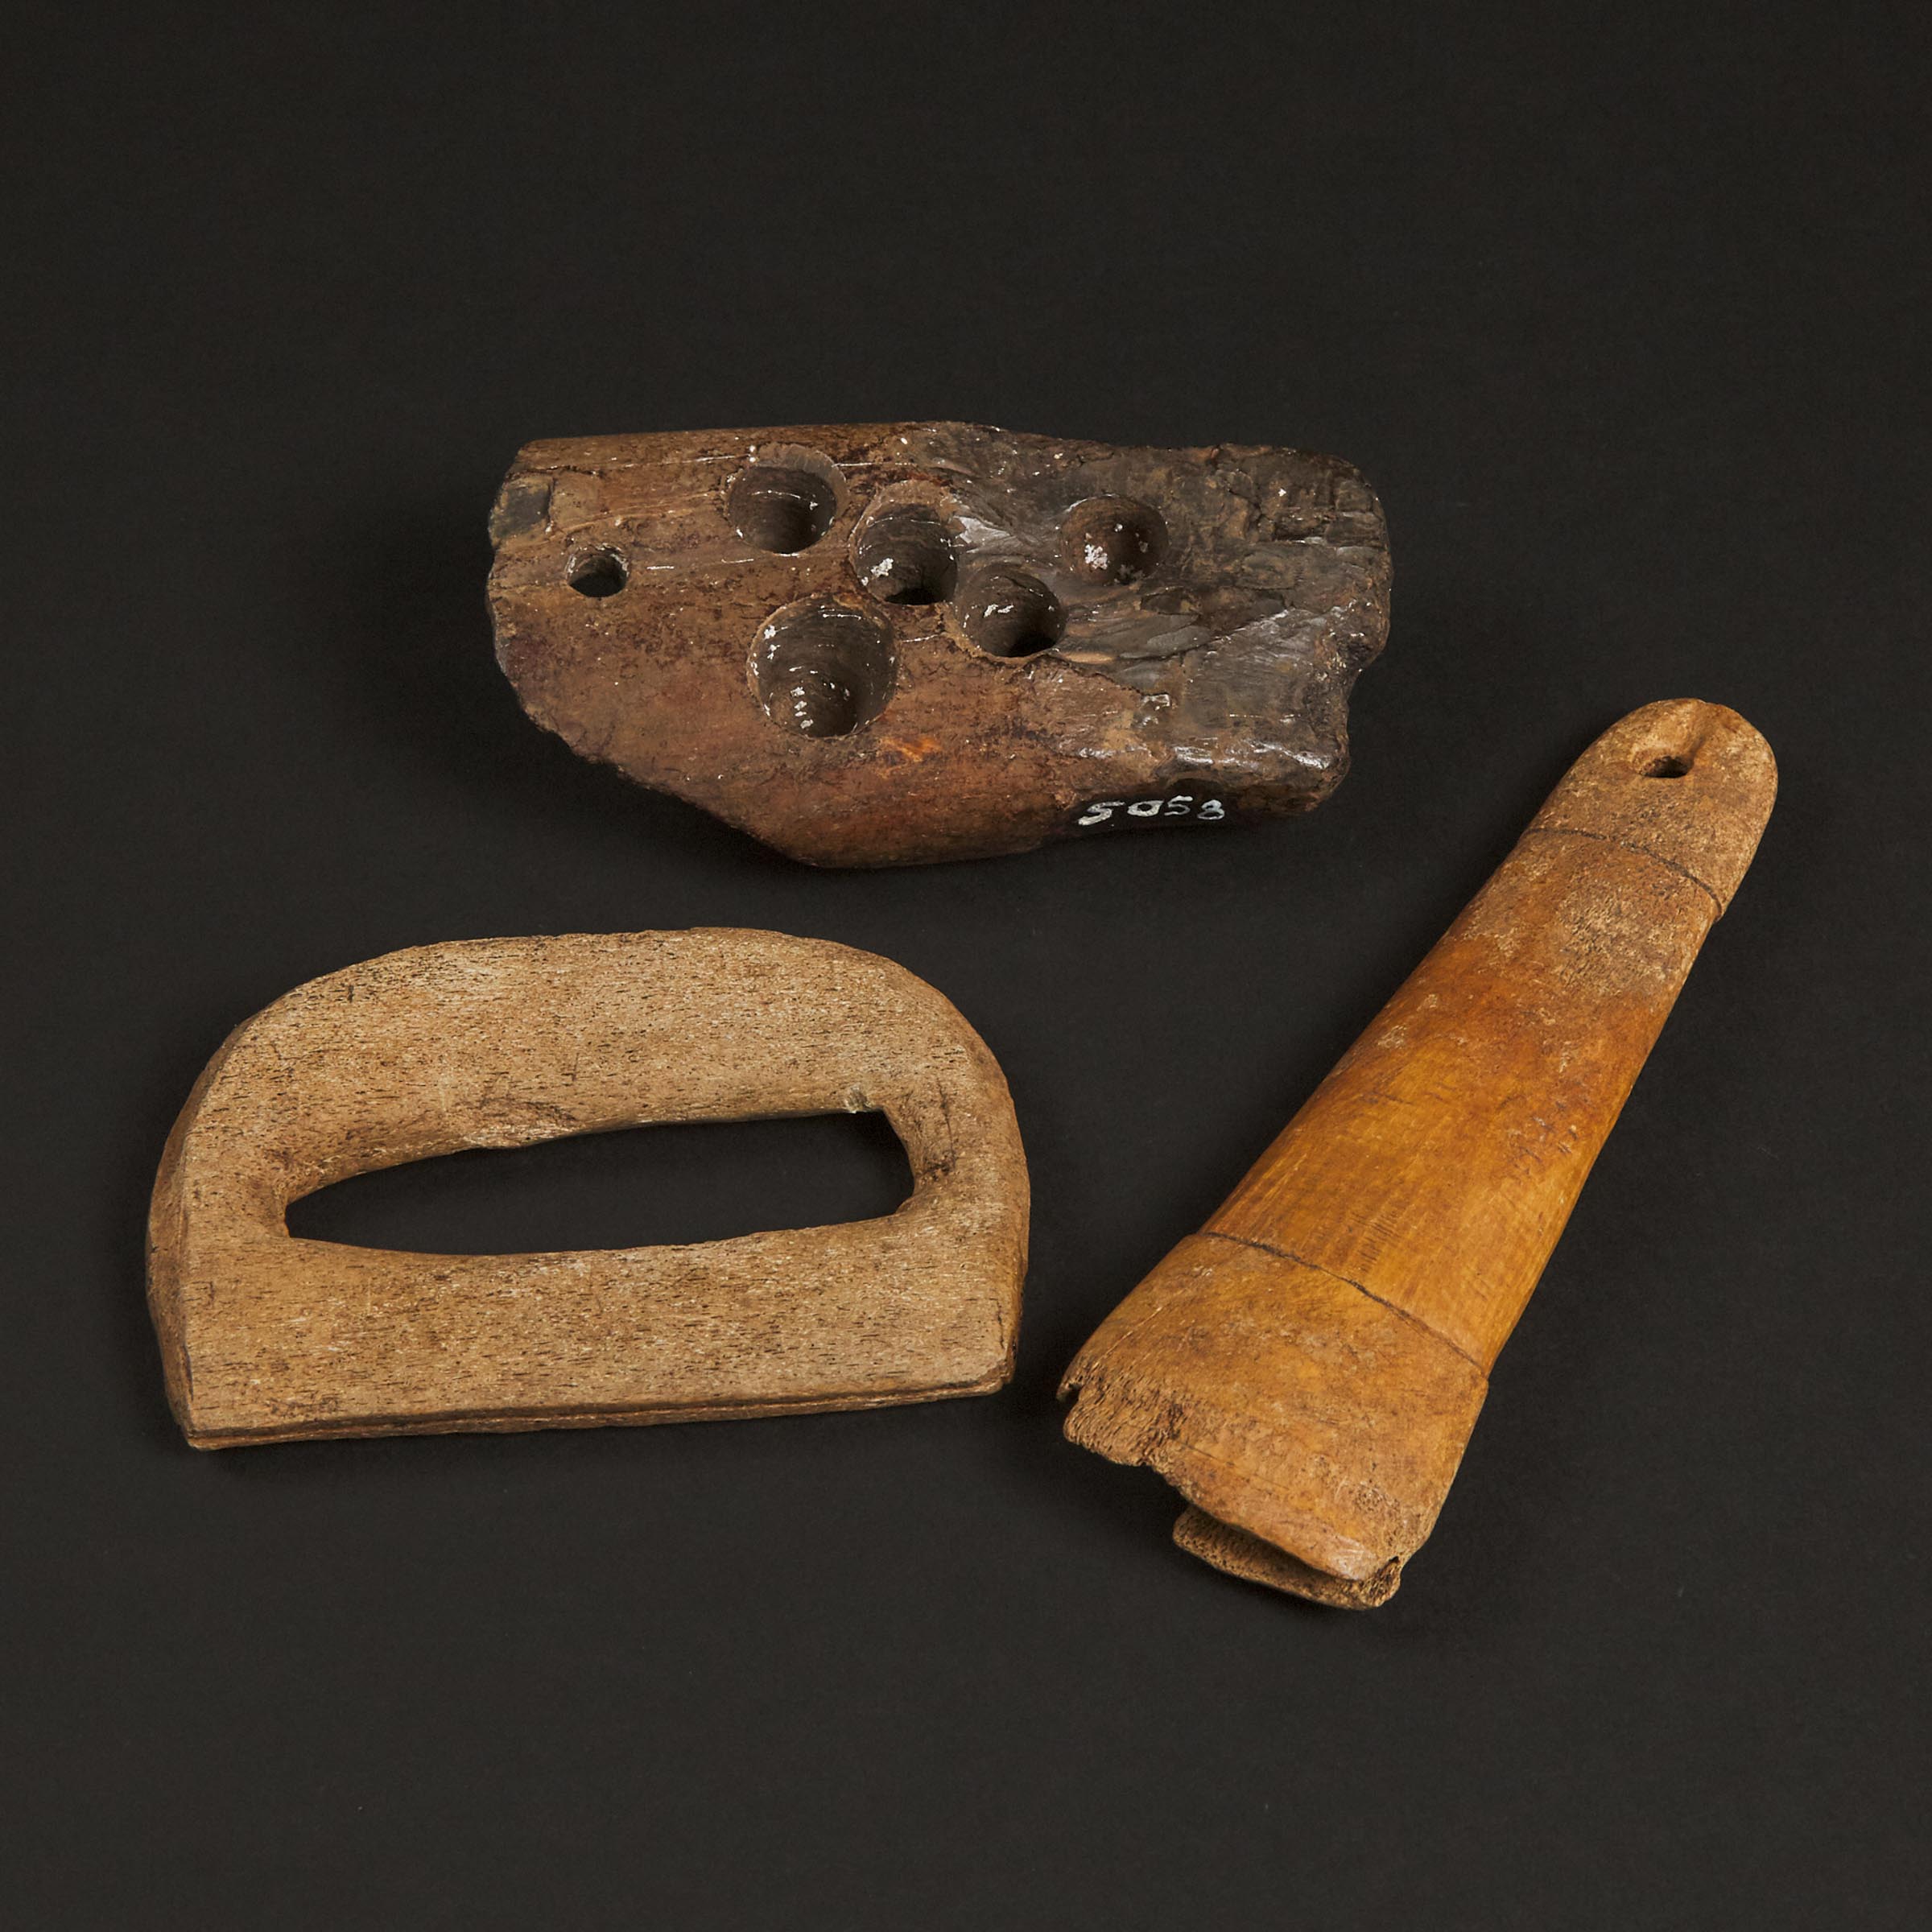 One Fire Starter Block and Two Additional Implements, Punuk, Yupik, Sivuqaq (St. Lawrence Island), ca. 500-1000 CE and Later